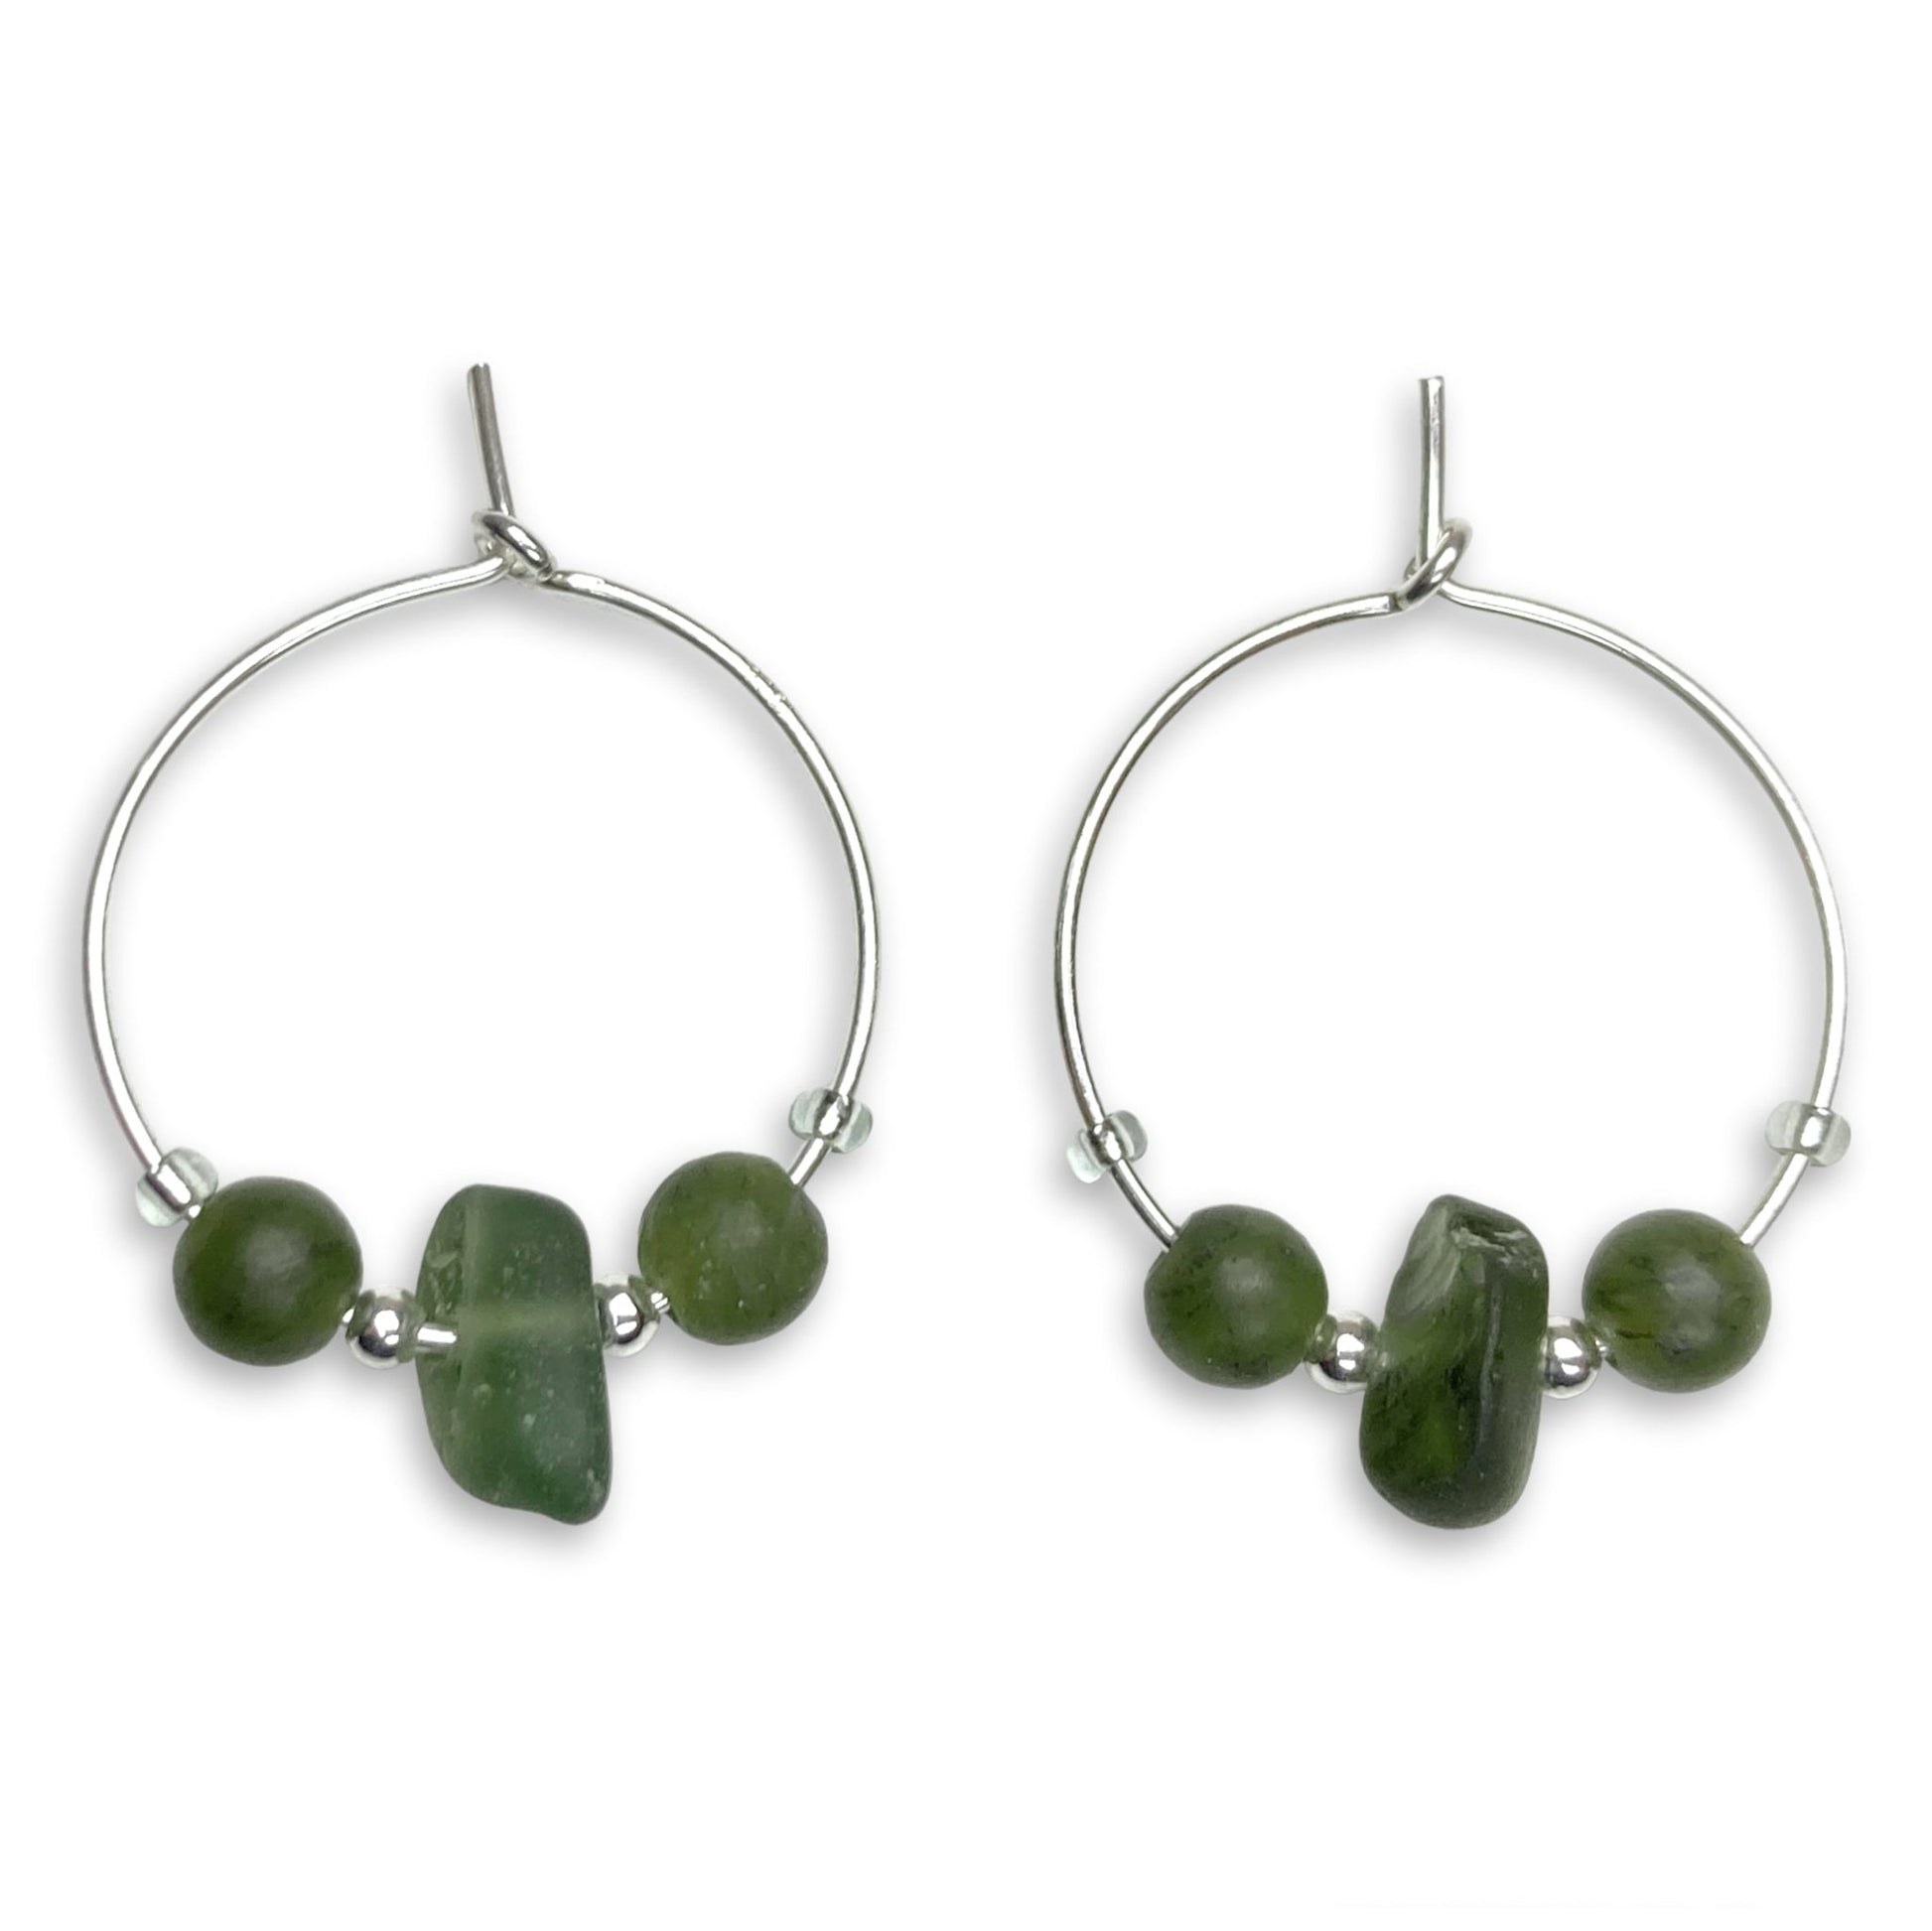 Green Sea Glass Small Hoop Earrings - 2cm Sterling Silver with Jade Crystal Beads - East Neuk Beach Crafts